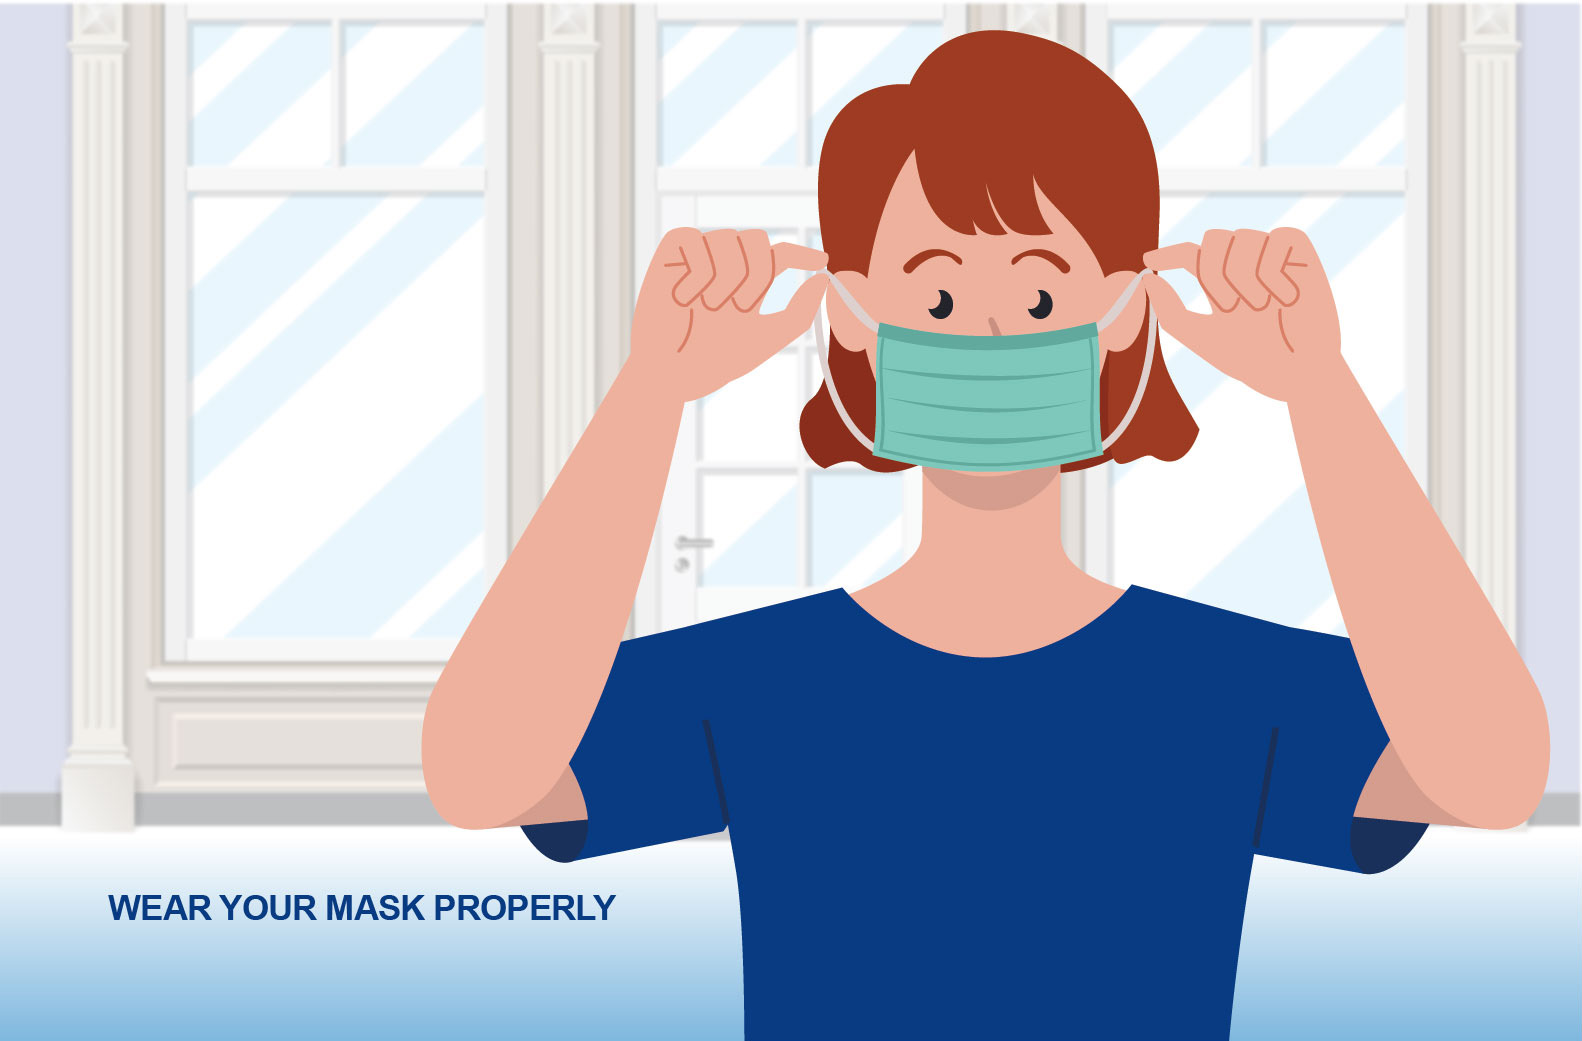 Illustration of a someone putting on a face mask